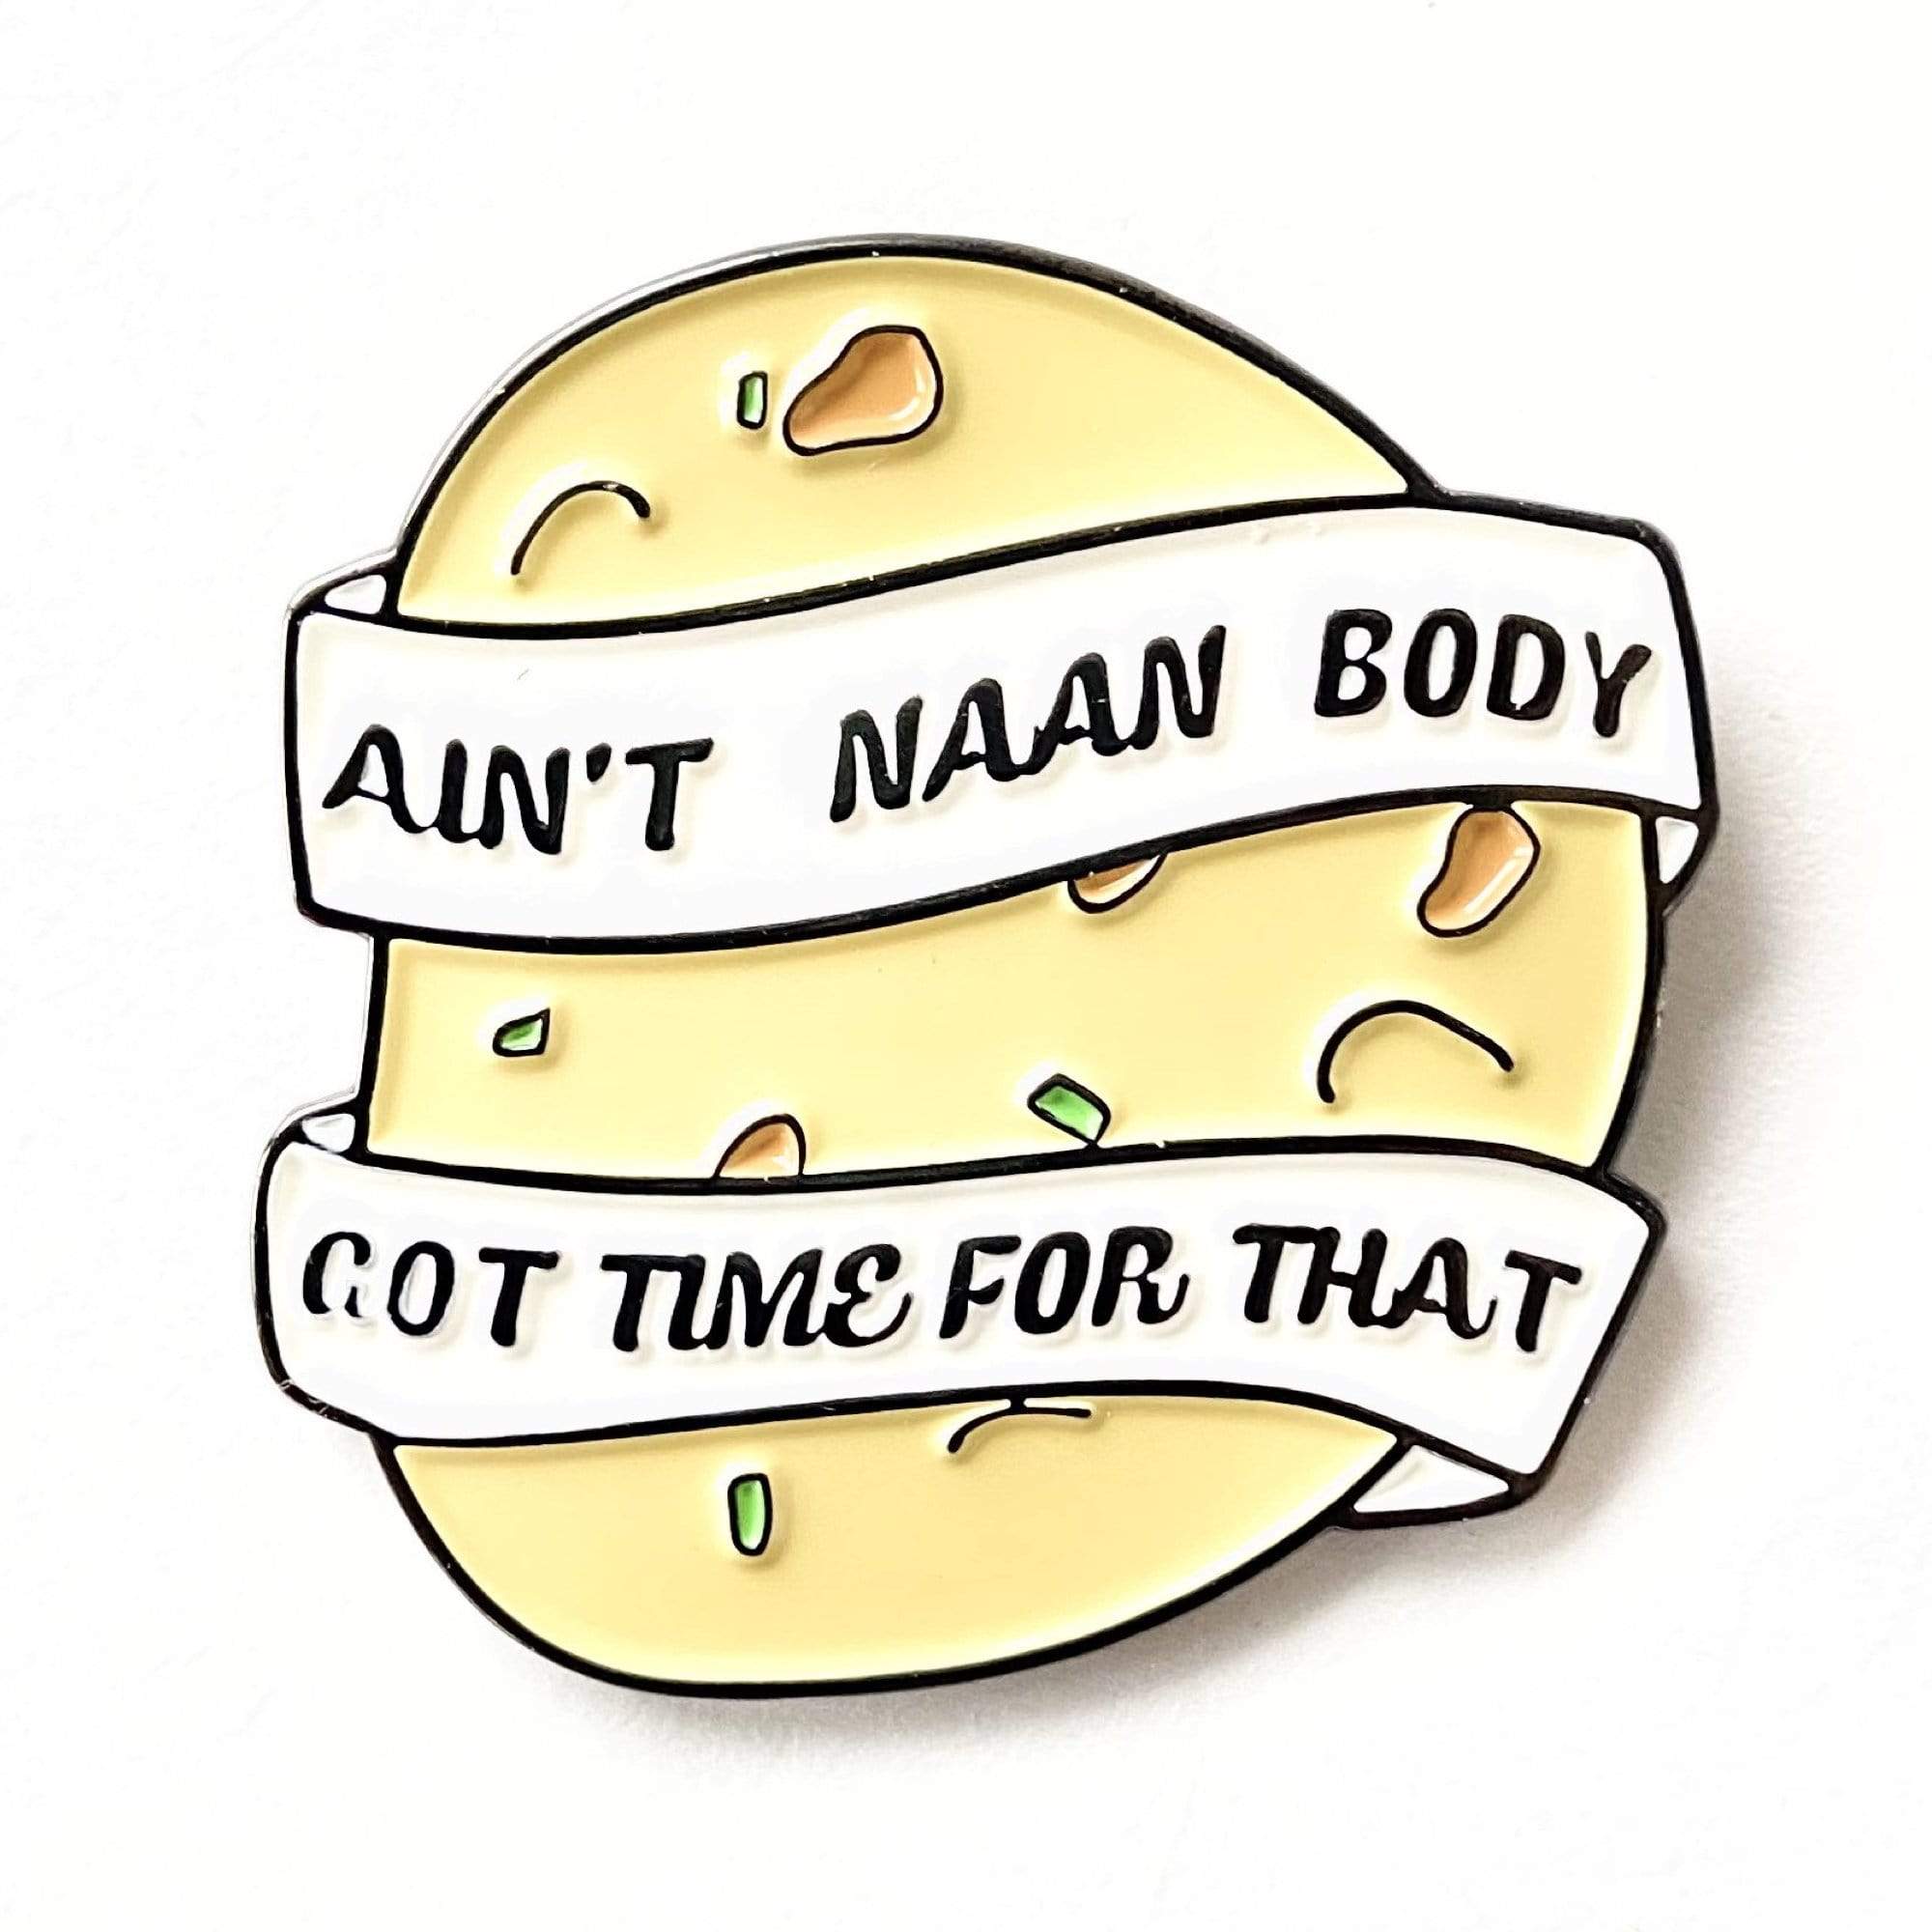 punimpressed Ain’t Naan Body Got Time For That pin